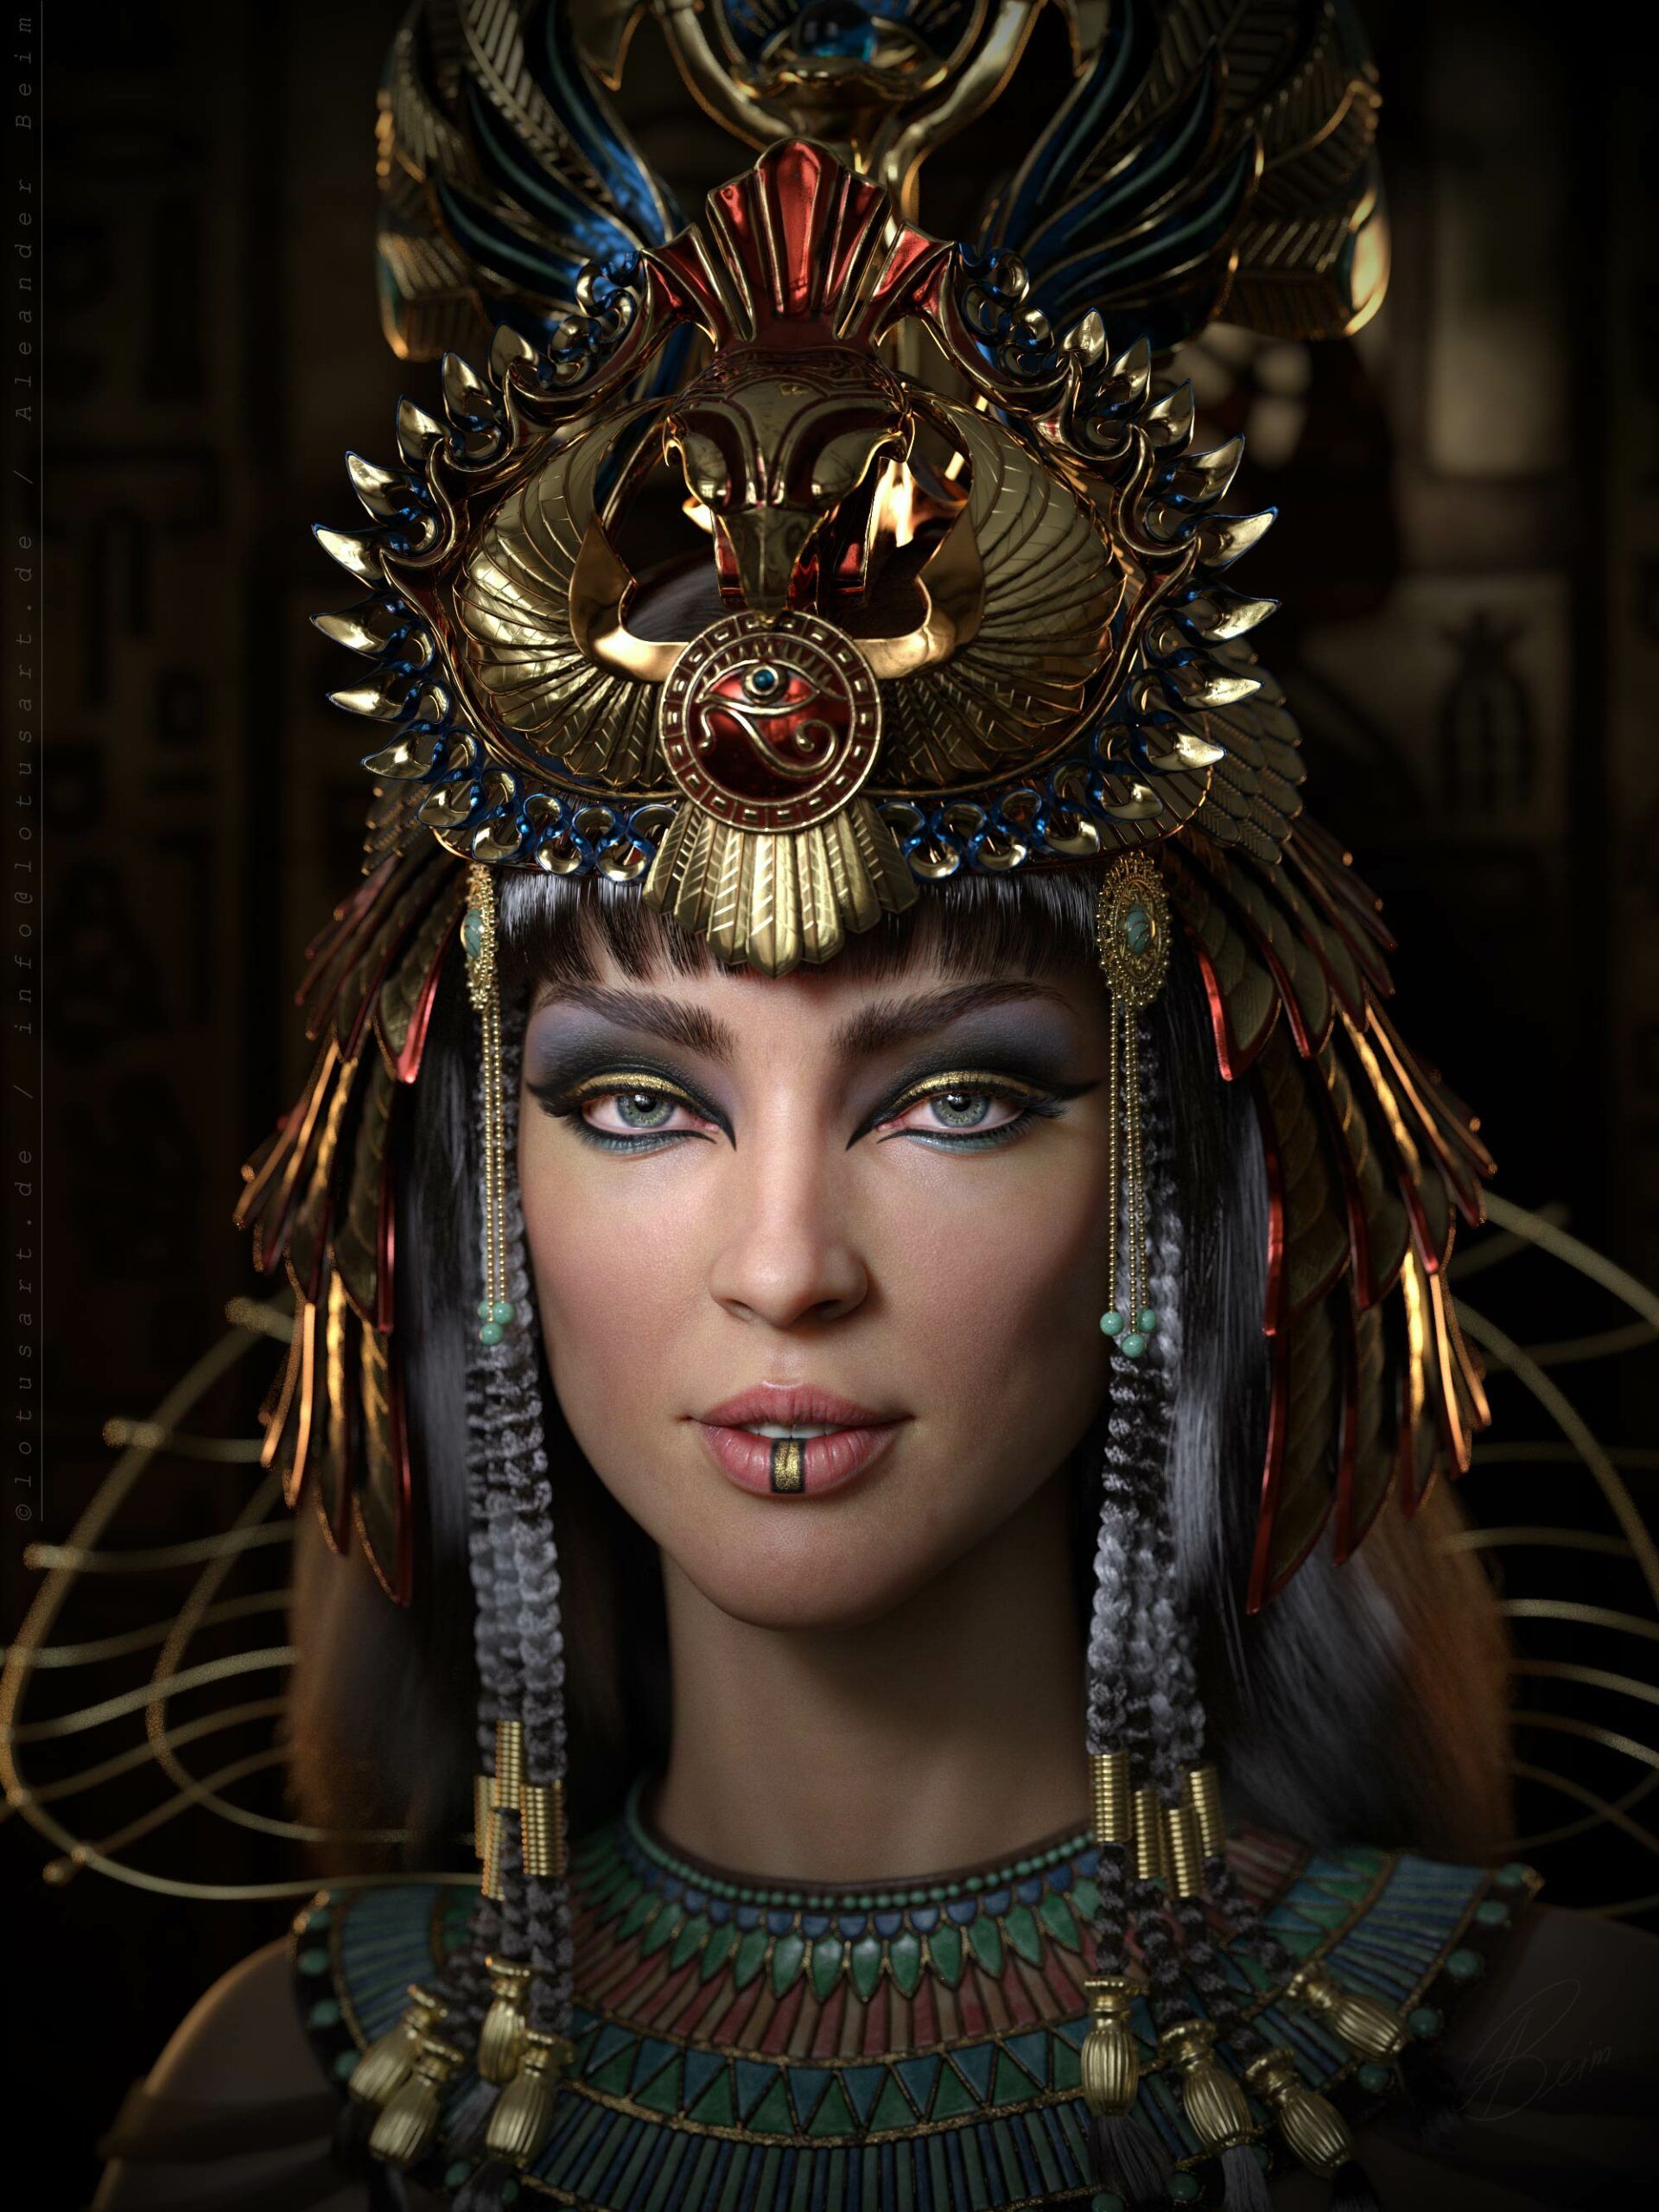 cleopatra_3d_character_historical_figure_pharaoh_egypt-scaled Cleopatra CG Character